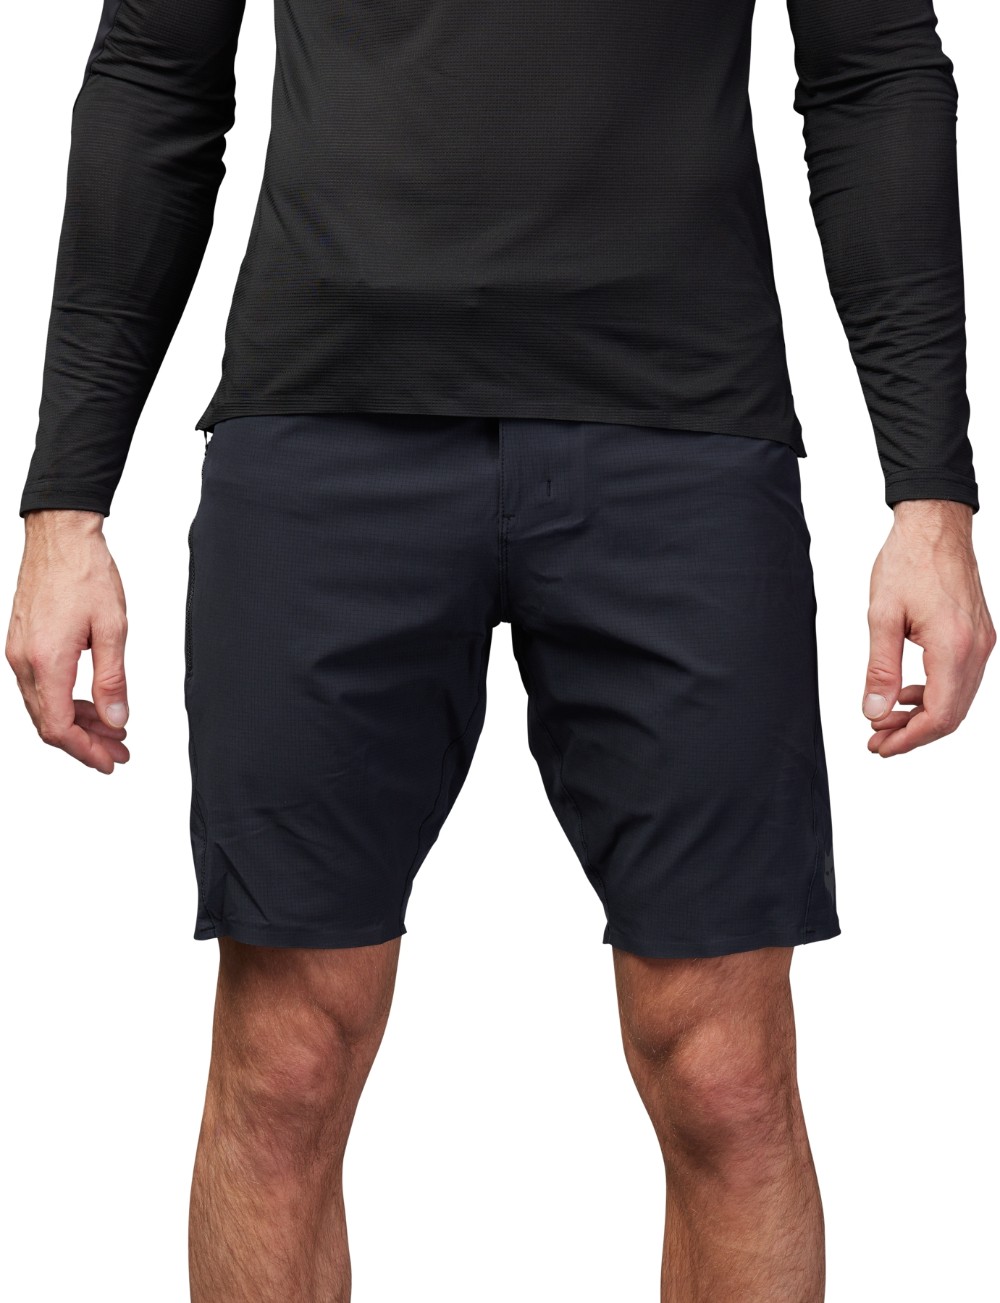 Flexair Ascent MTB Shorts with Liner image 0